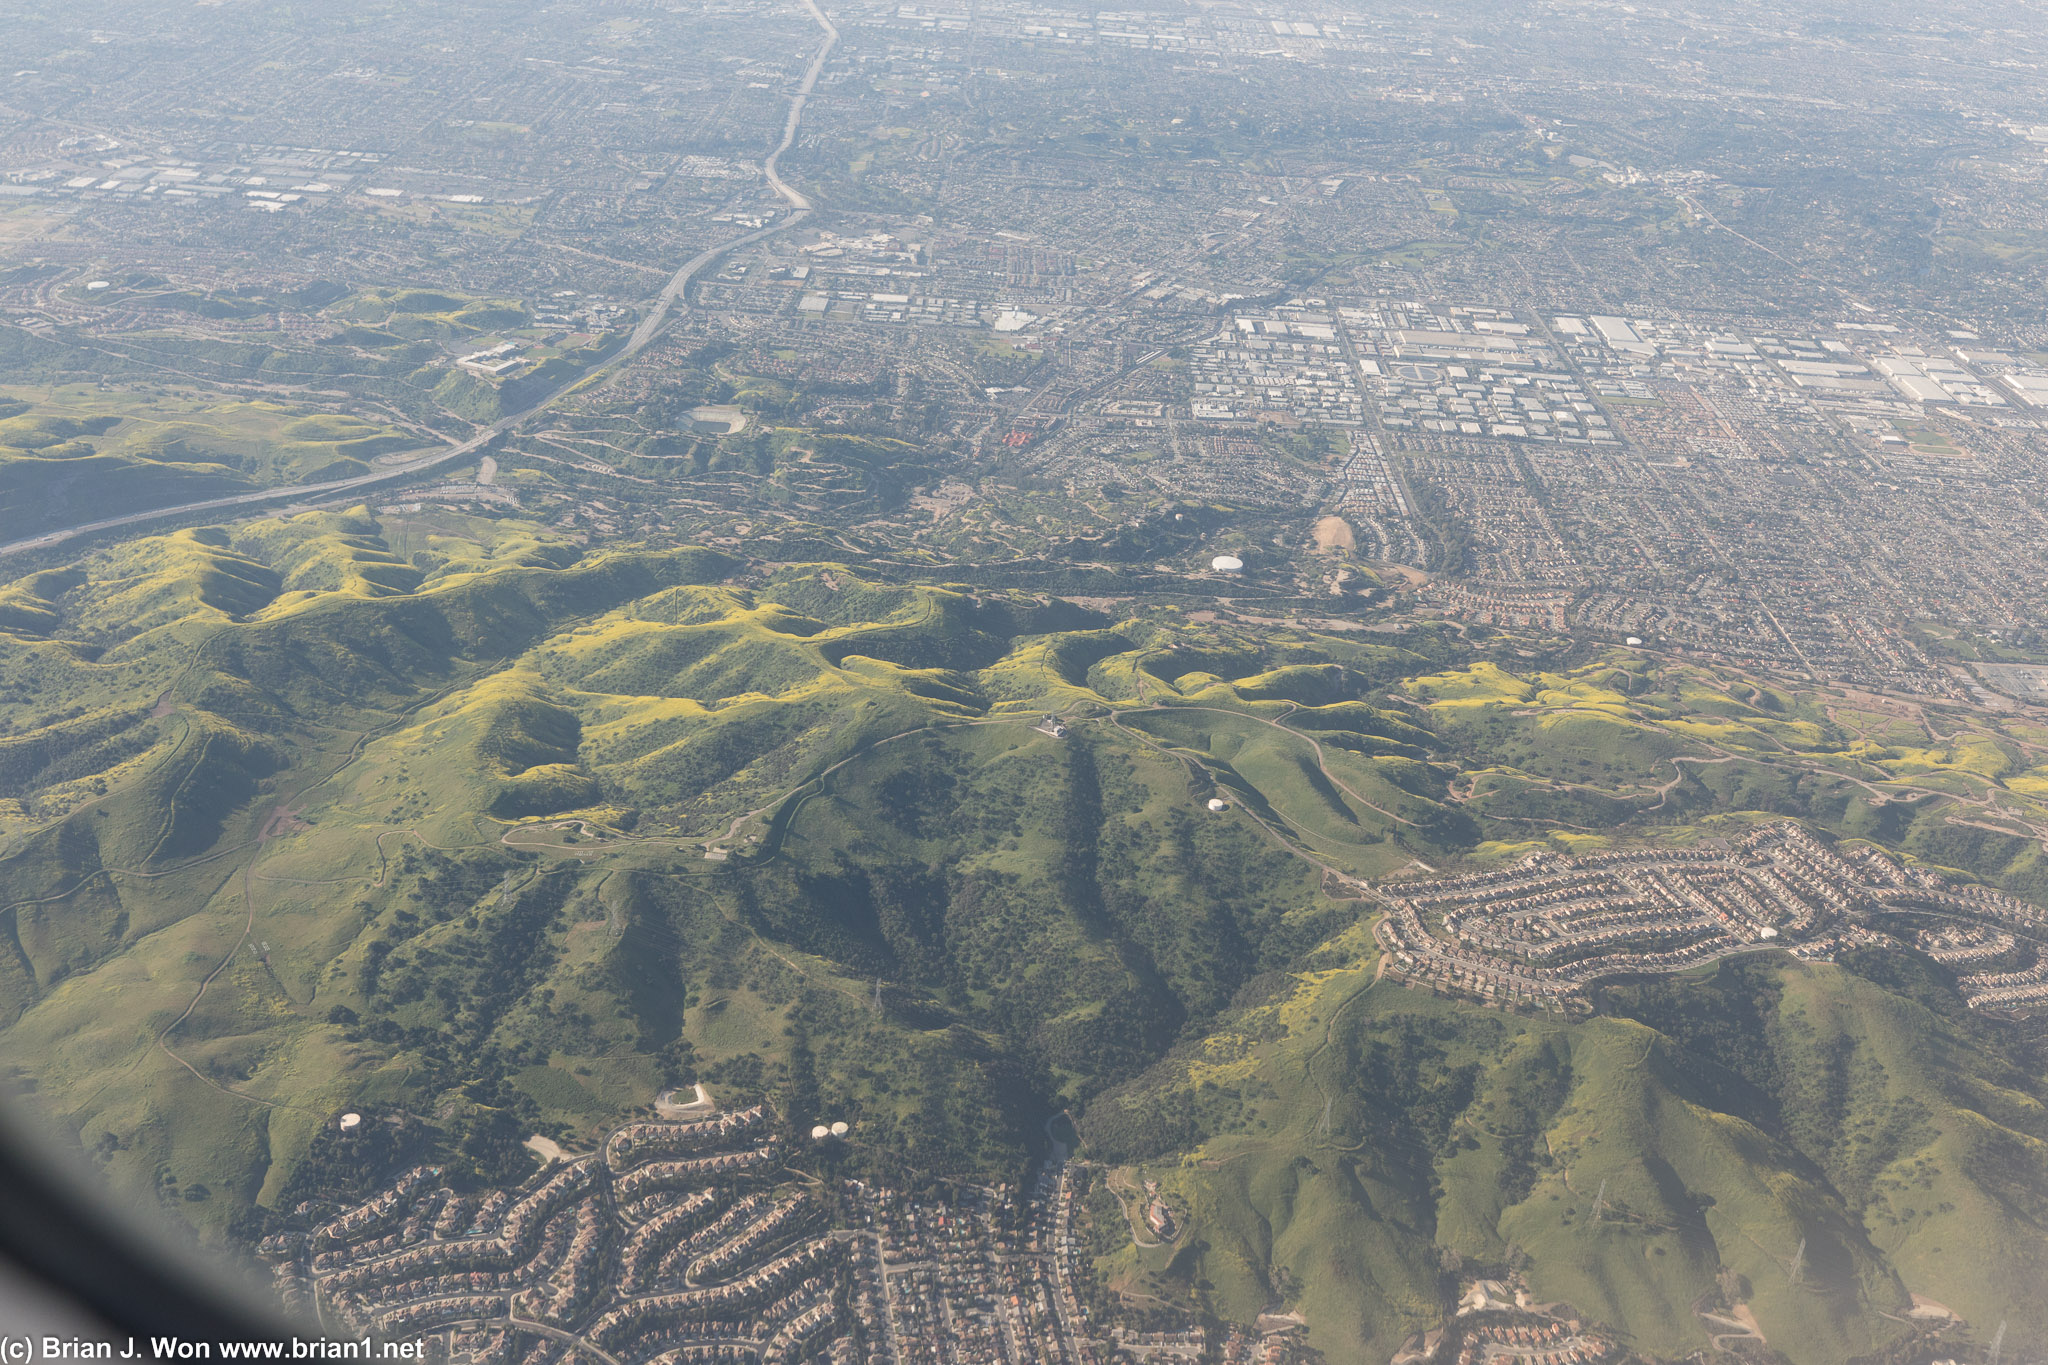 CA-57 on the left, Rowland Heights at the very bottom, Brea in the background. Wildflowers in the hills.